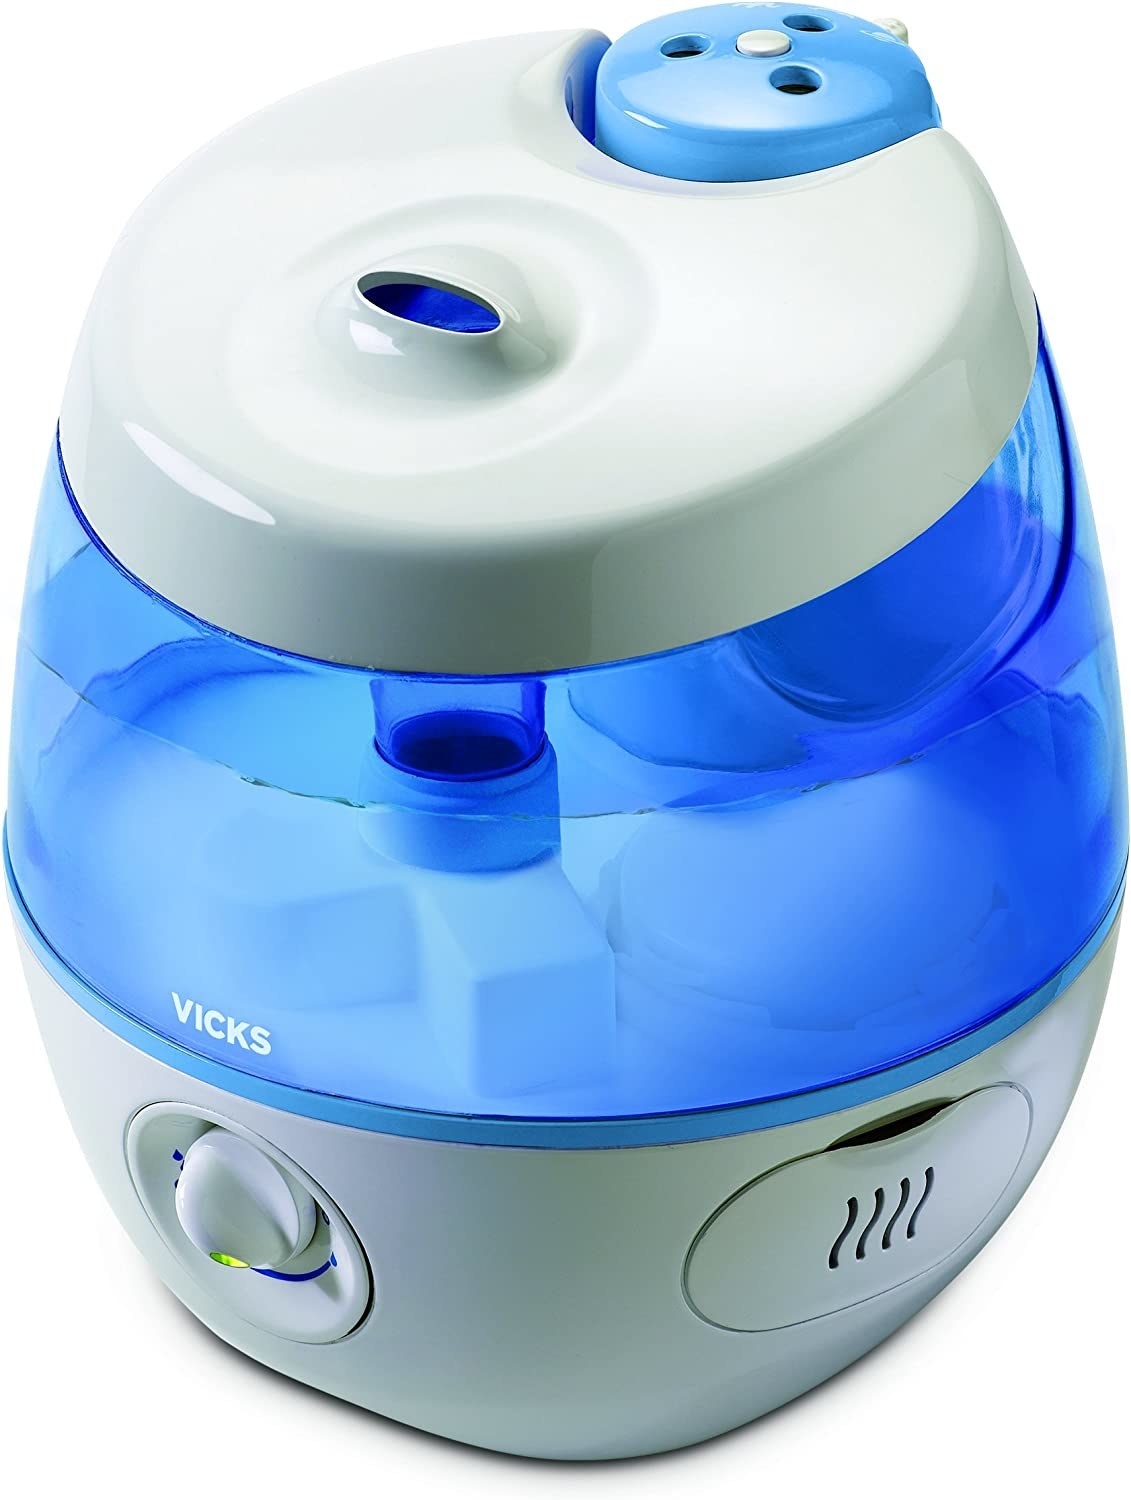 a vicks humidifier against a blank background